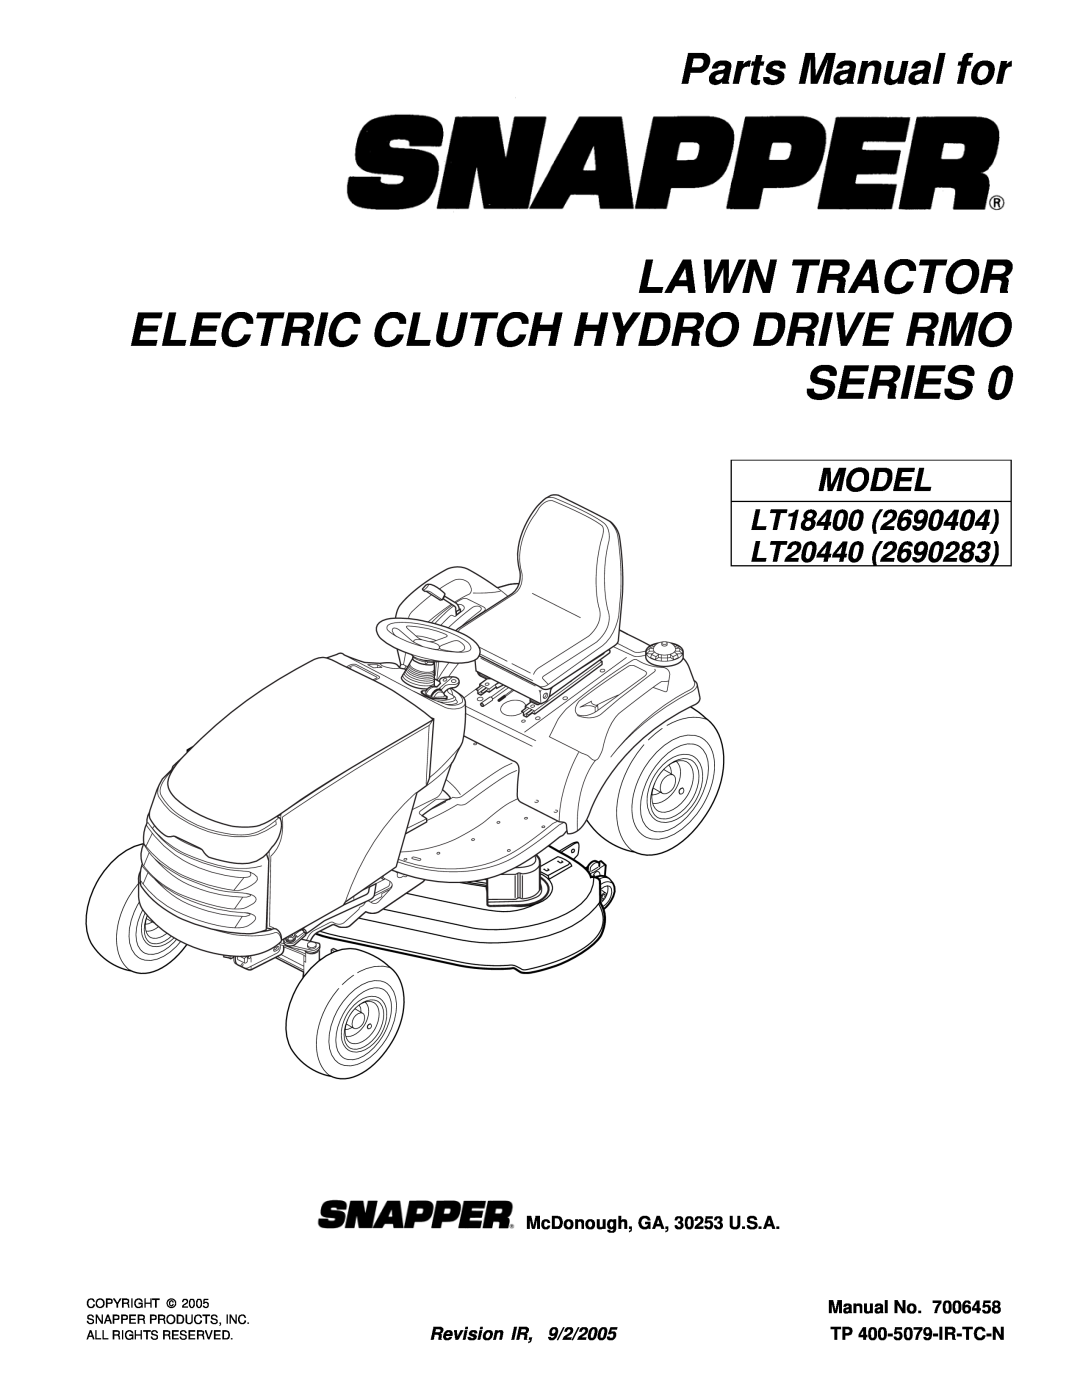 Snapper manual Lawn Tractor Electric Clutch Hydro Drive Rmo Series, Parts Manual for, Model, LT18400 LT20440, Manual No 